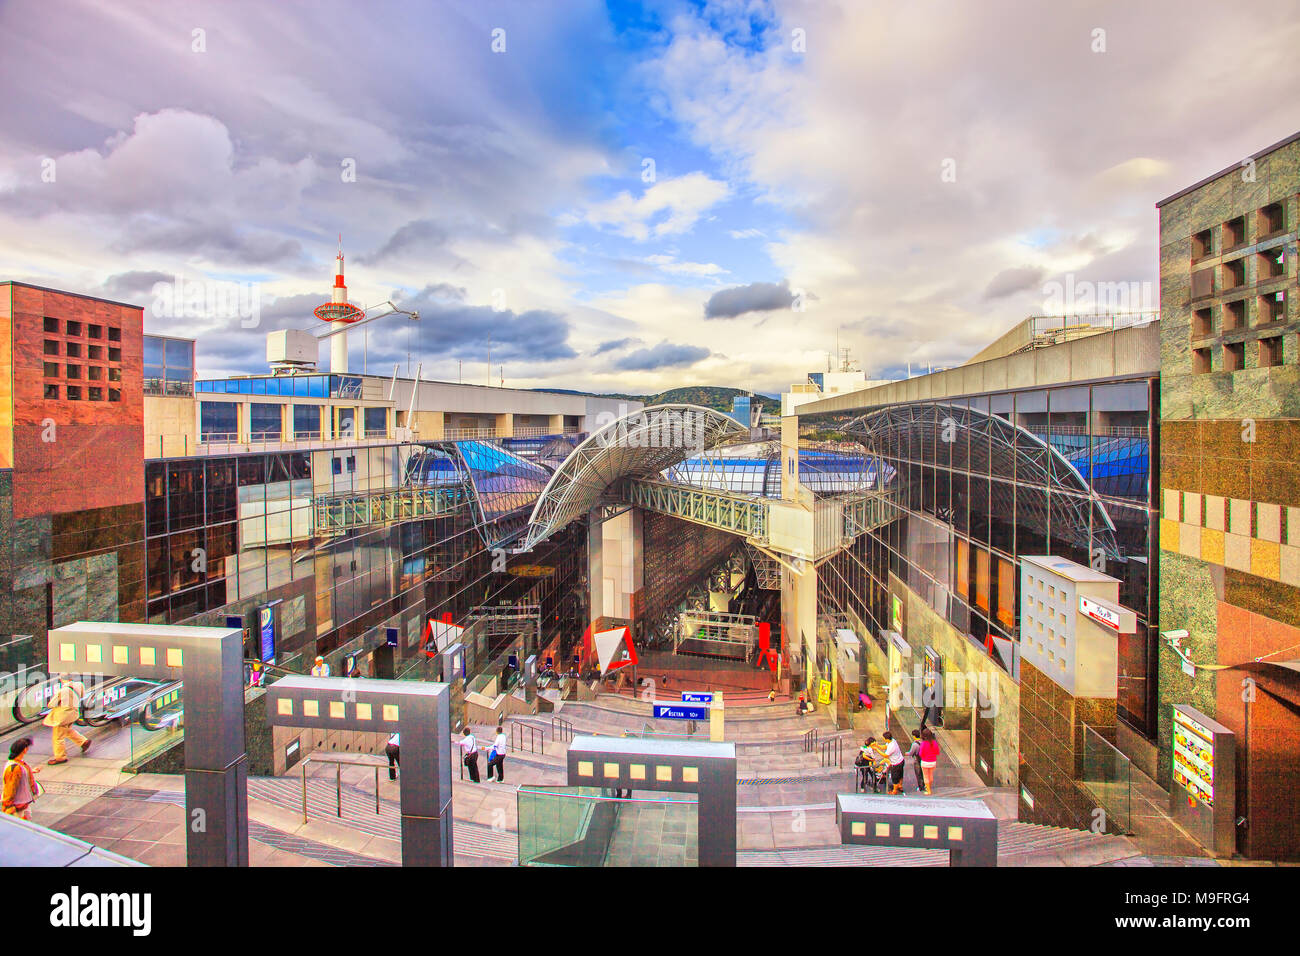 KYOTO / JAPAN - MAY 26, 2010: Panoramic view of modern Kyoto railway station. It is one of the country's largest buildings, incorporating a shopping m Stock Photo